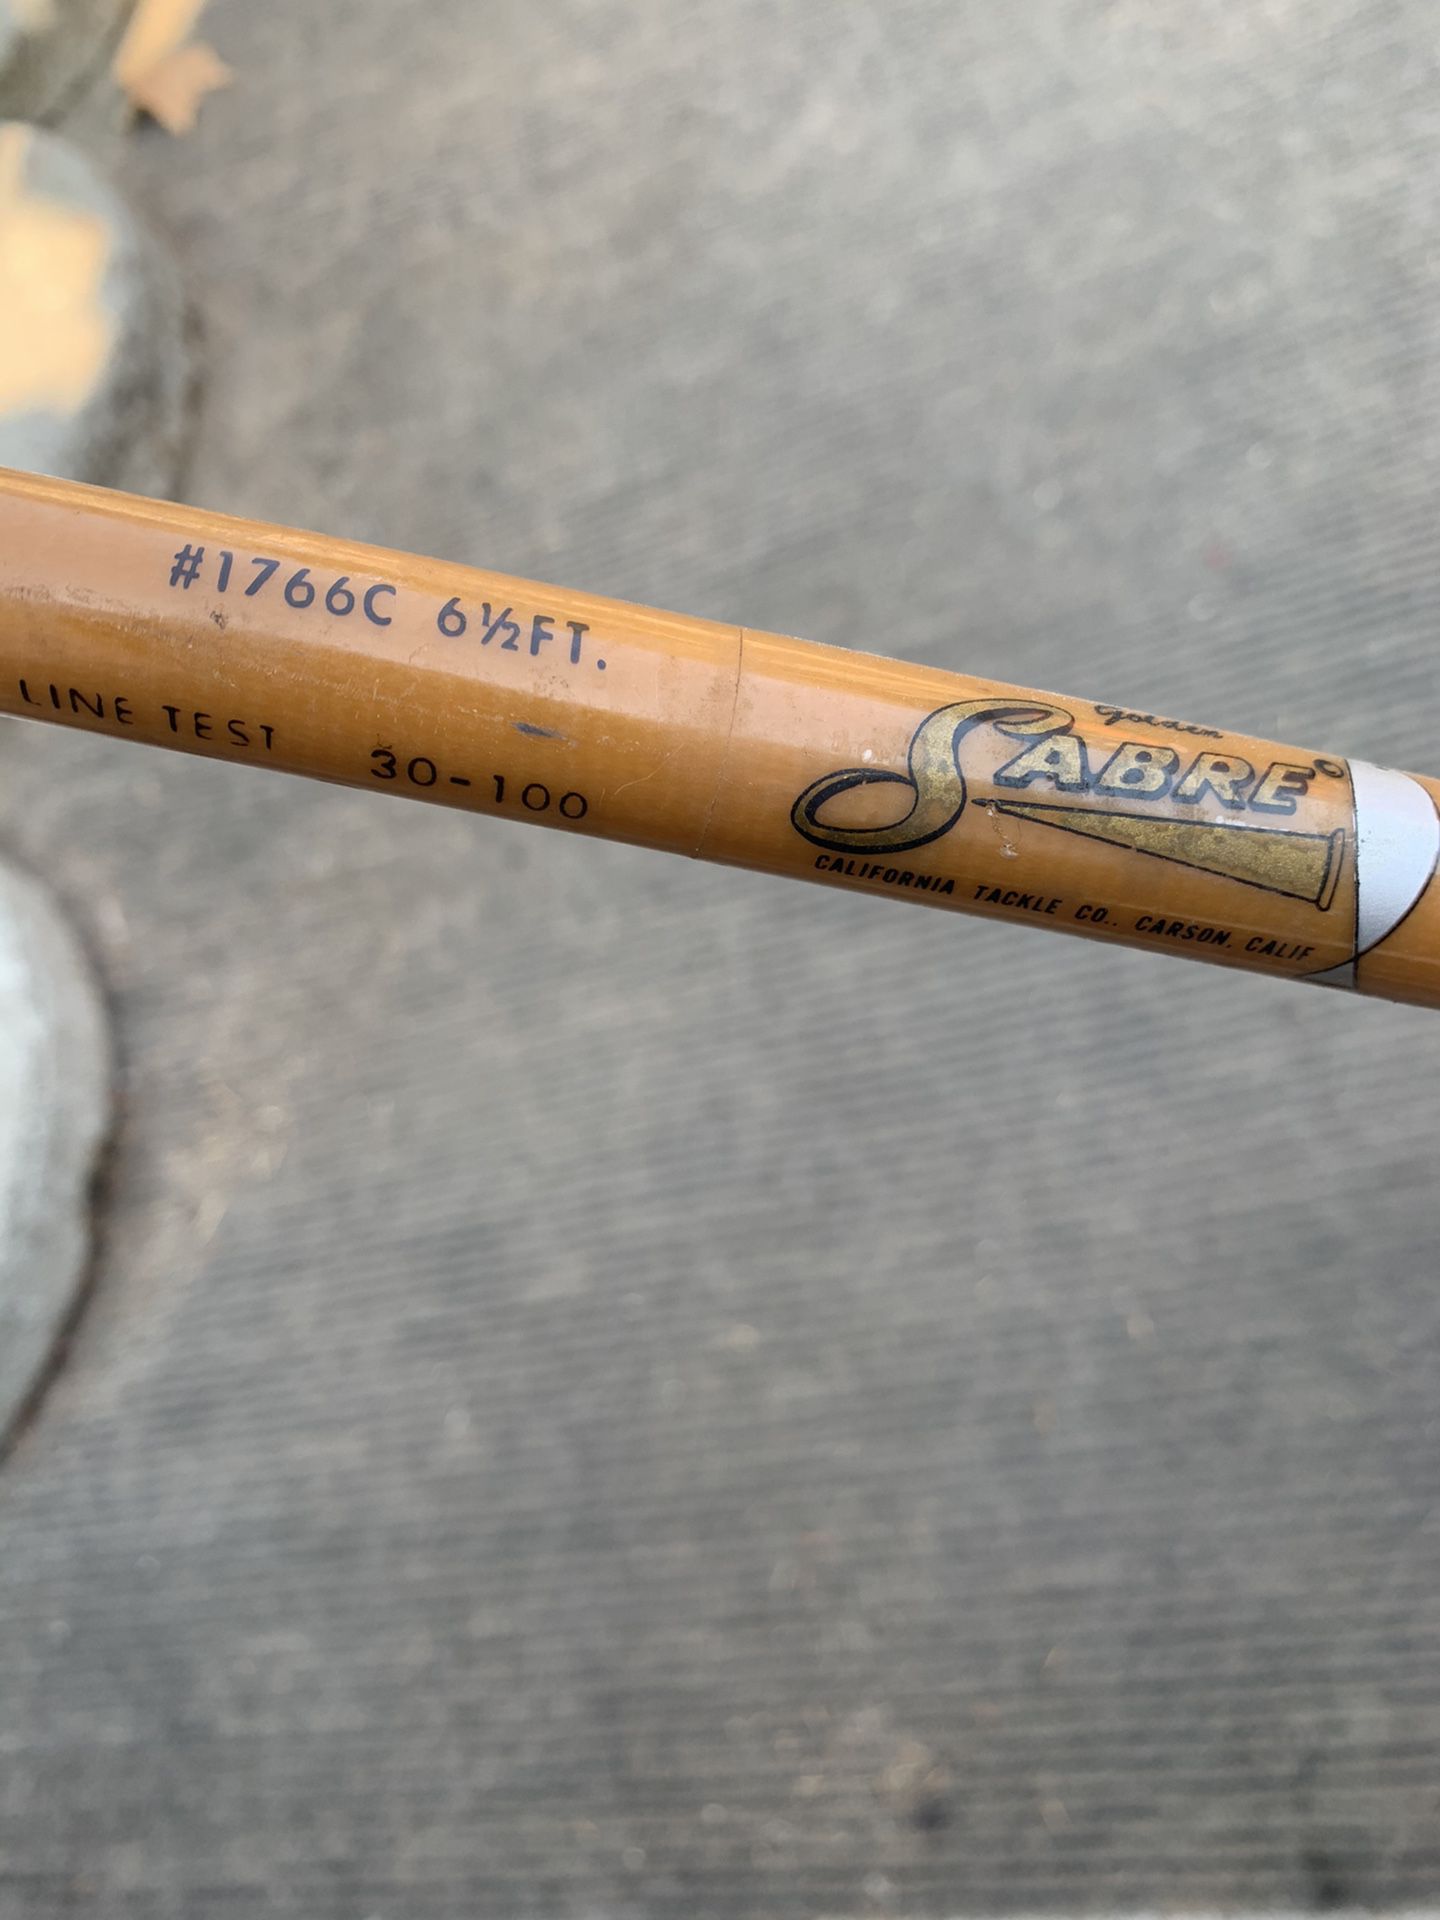 Vintage Sabre #1766C - Big Game Fishing Rod - Nypoxy 30-100lb -6.5' for  Sale in Antioch, CA - OfferUp